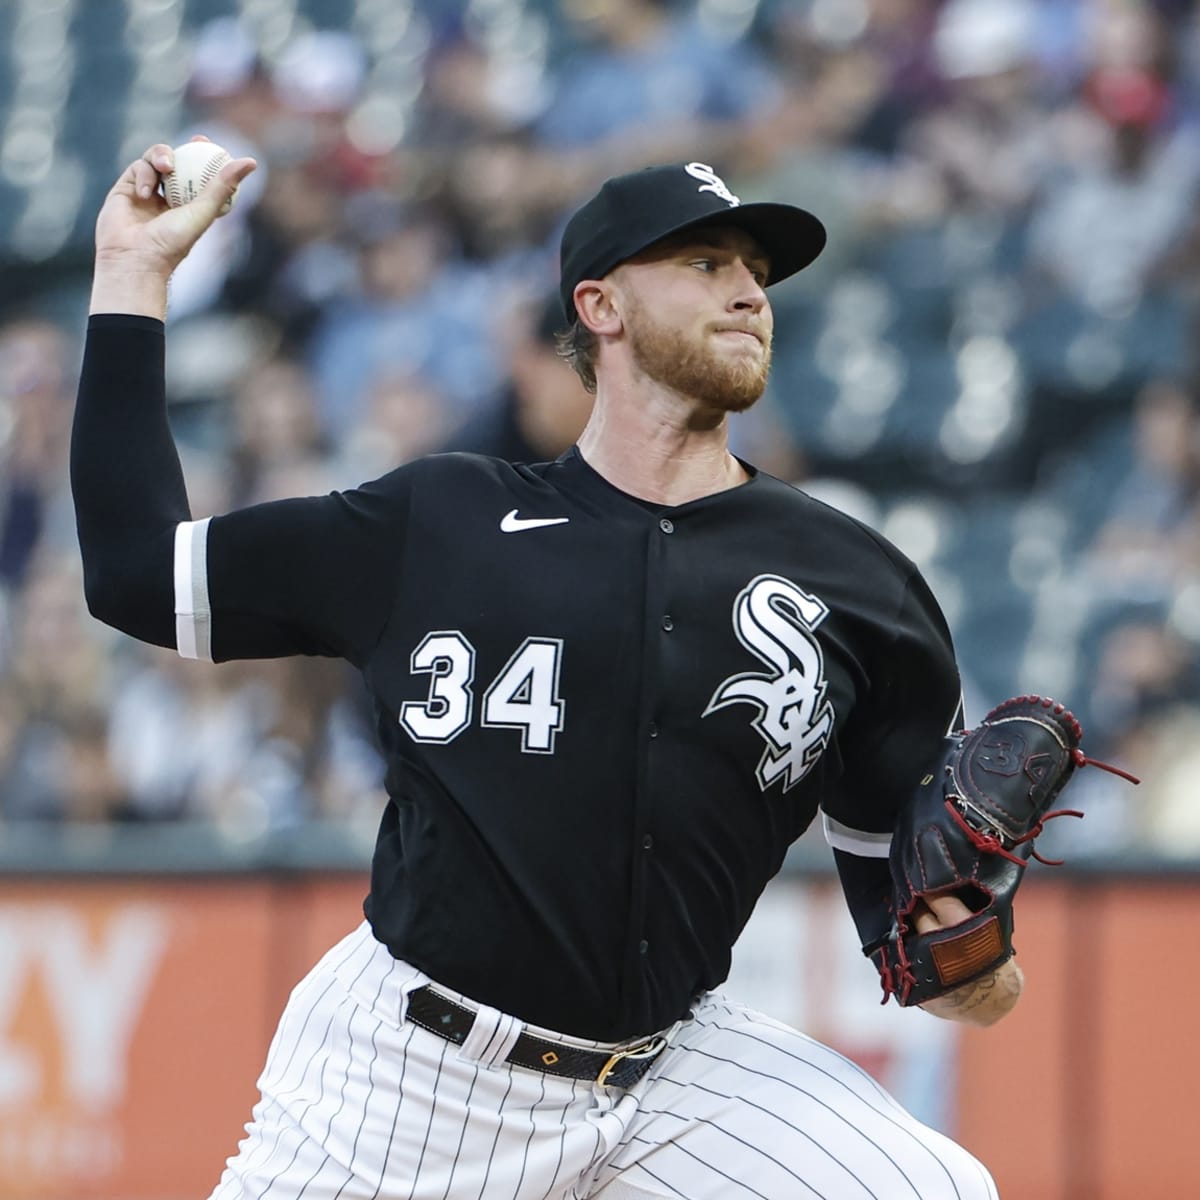 Chicago White Sox: Michael Kopech is brilliant in relief this year